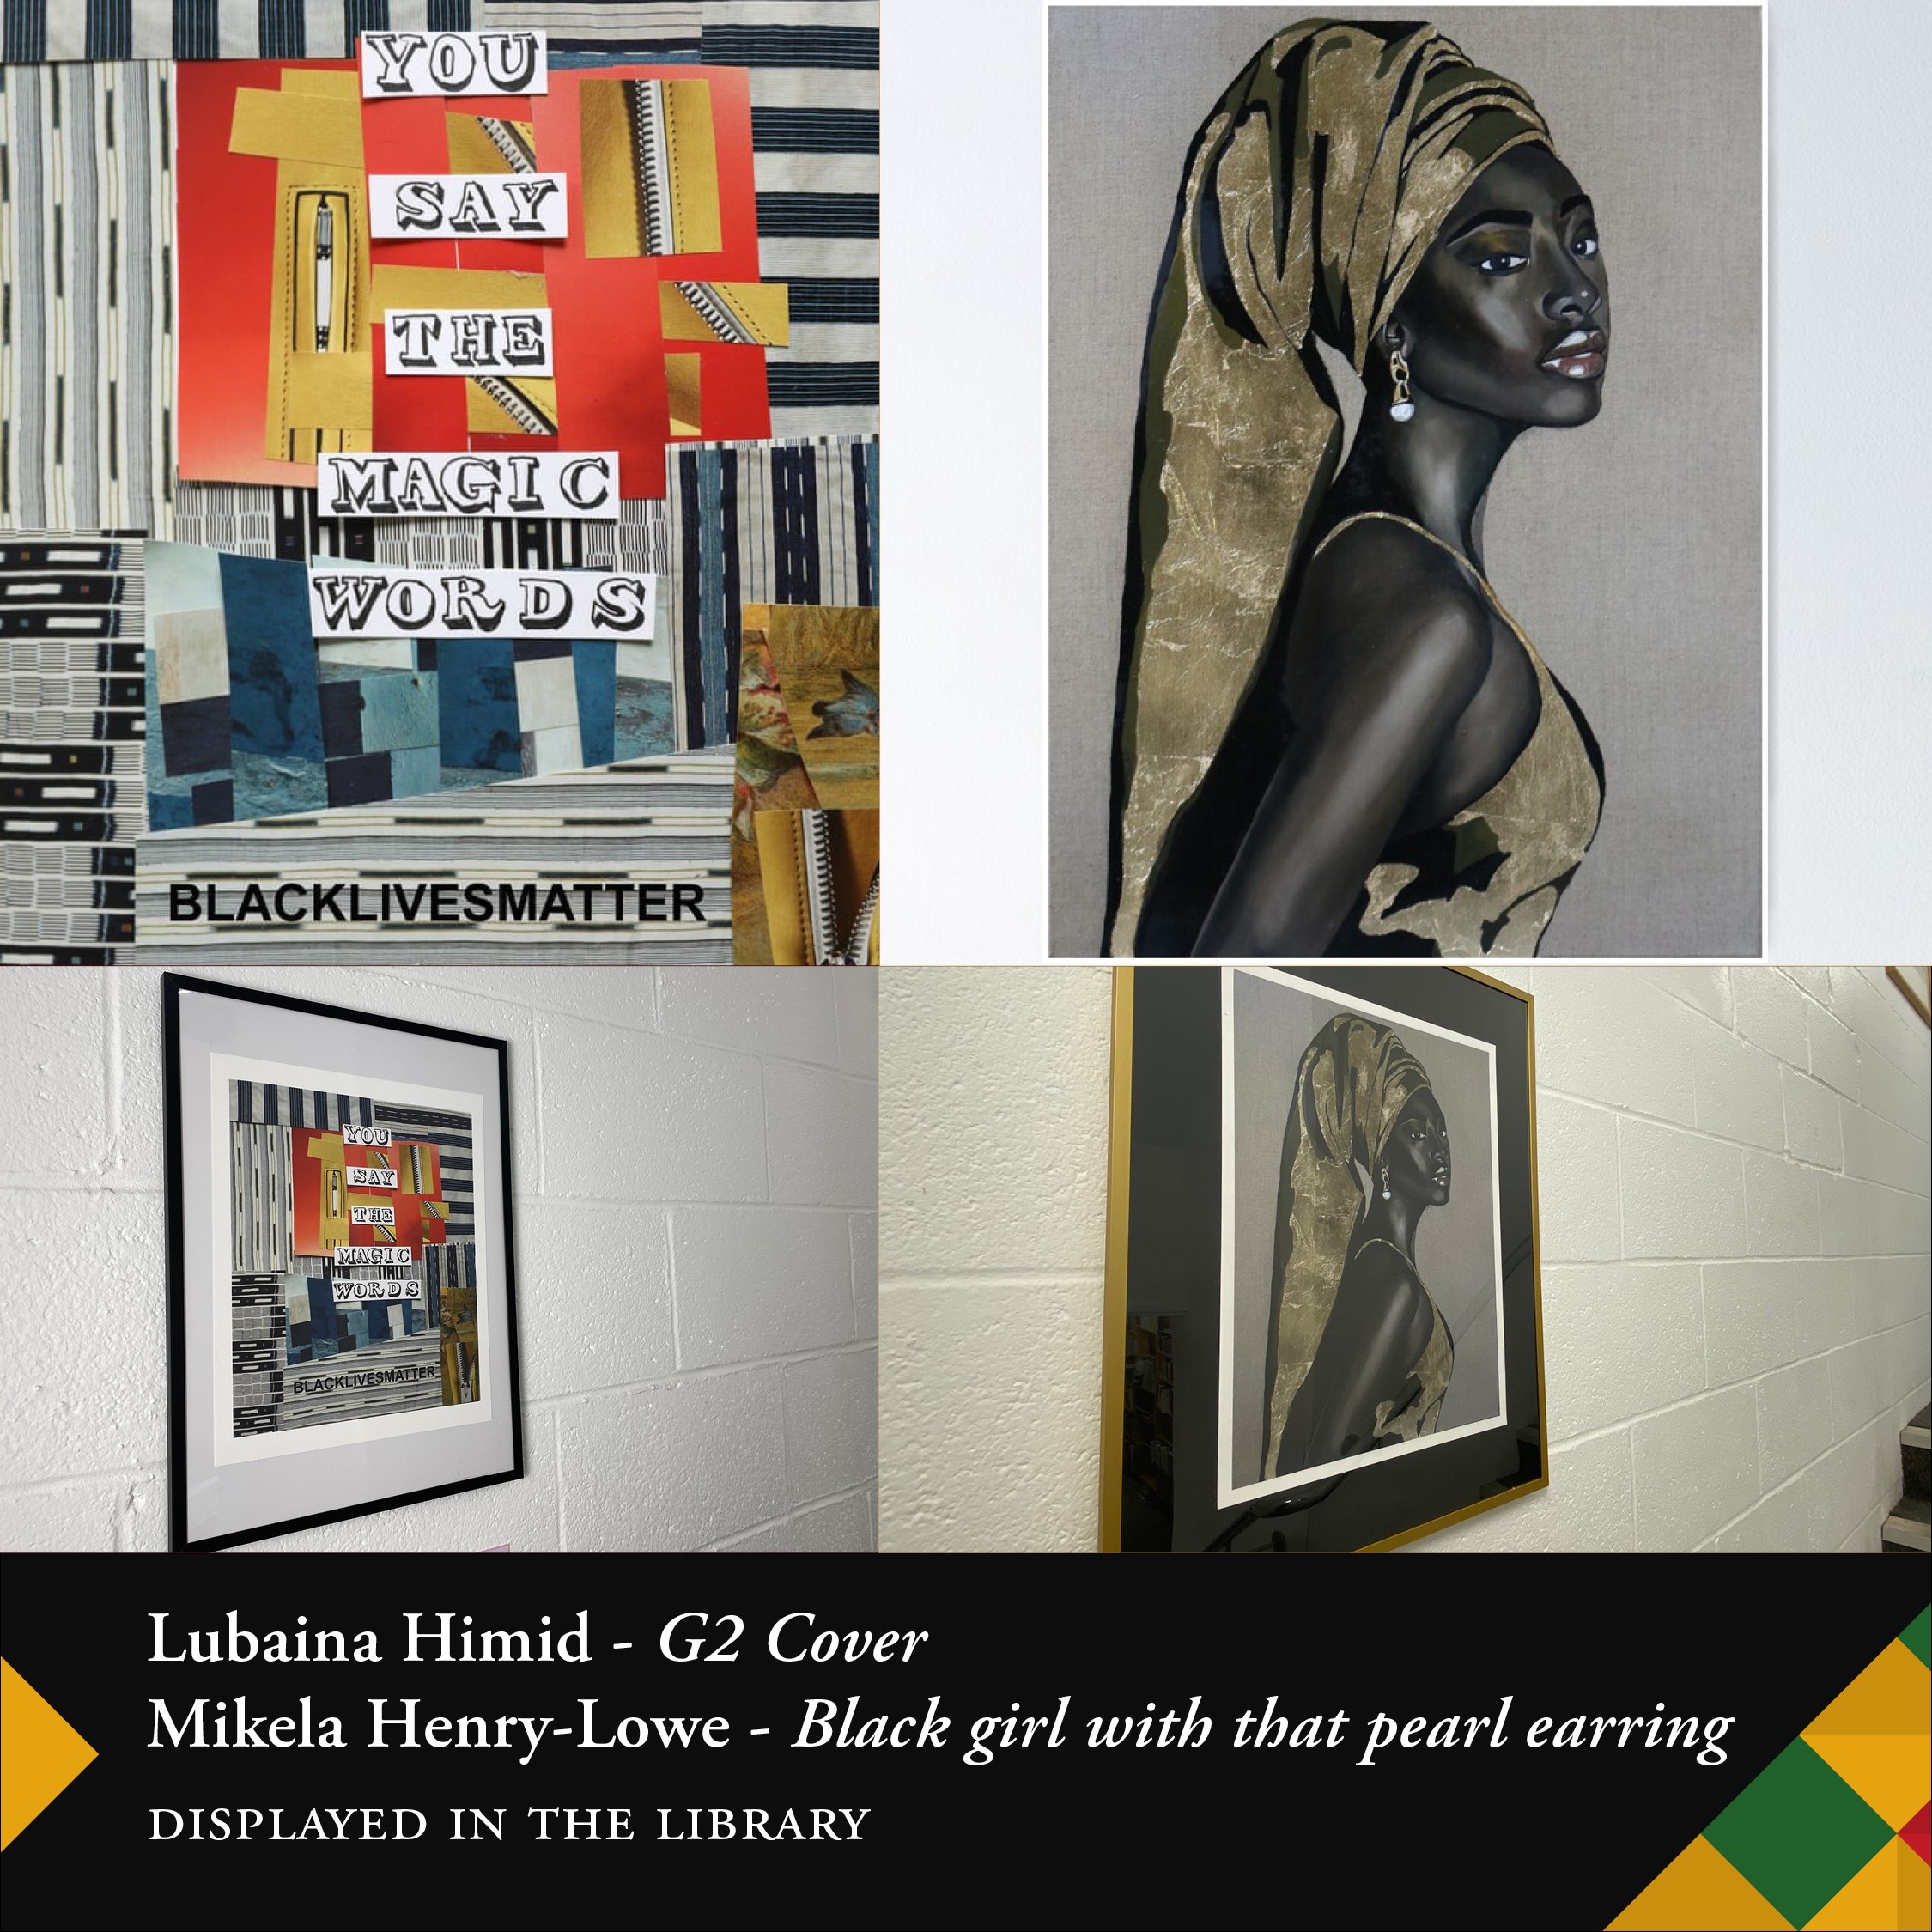 Lubaina Humid, G2 Cover, 2020 and Mikela Henry-Lowe, Black girl with that pearl earring, 2019